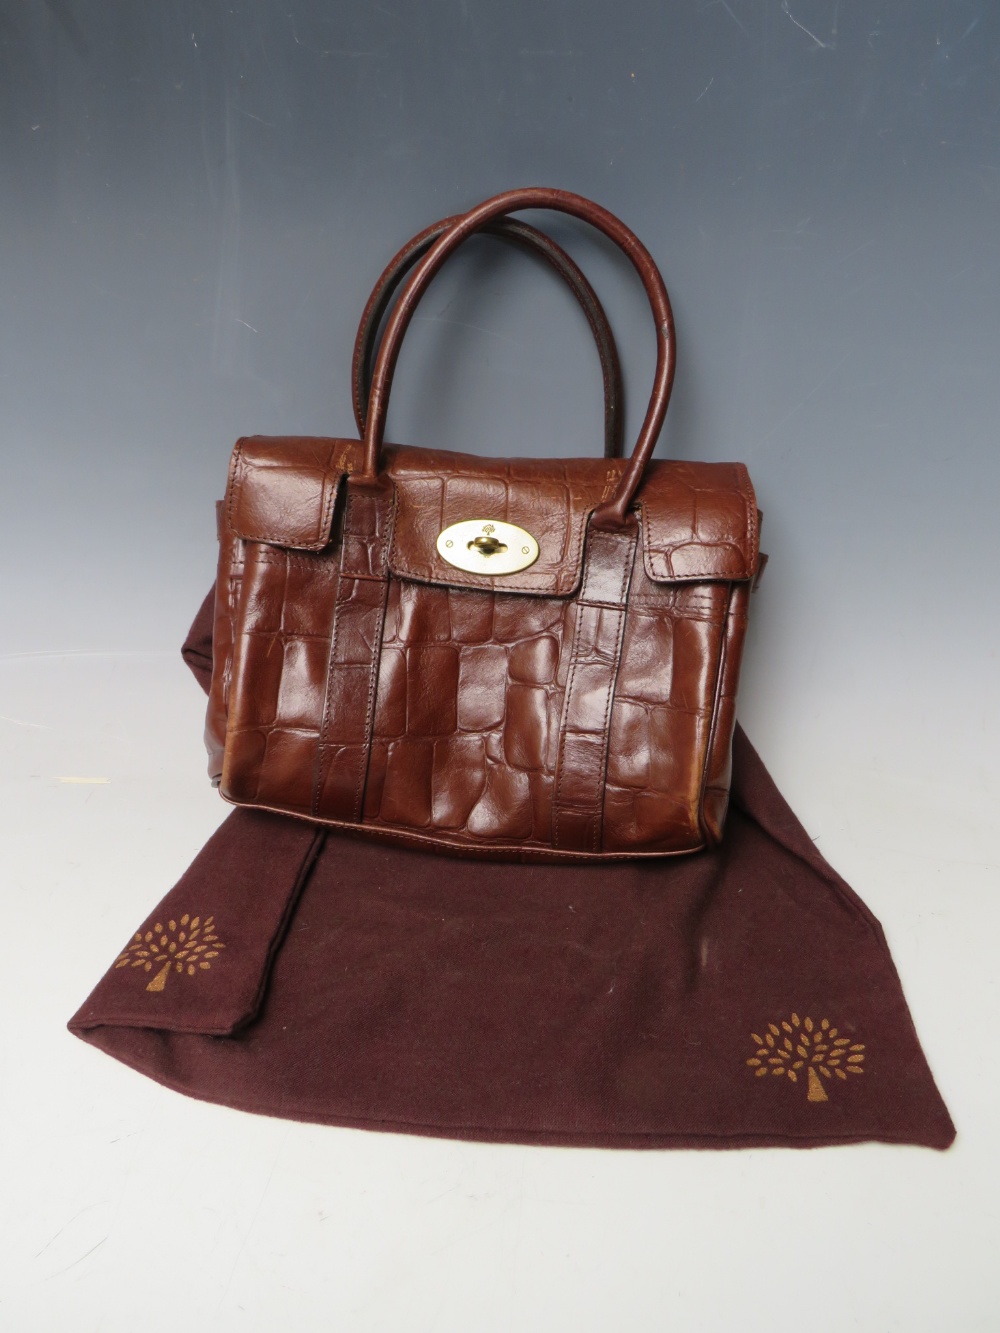 A LADIES MULBERRY CROCODILE EMBOSSED SMALL 'BAYSWATER' HANDBAG, with dust cover, W 26.5 cm, H 34